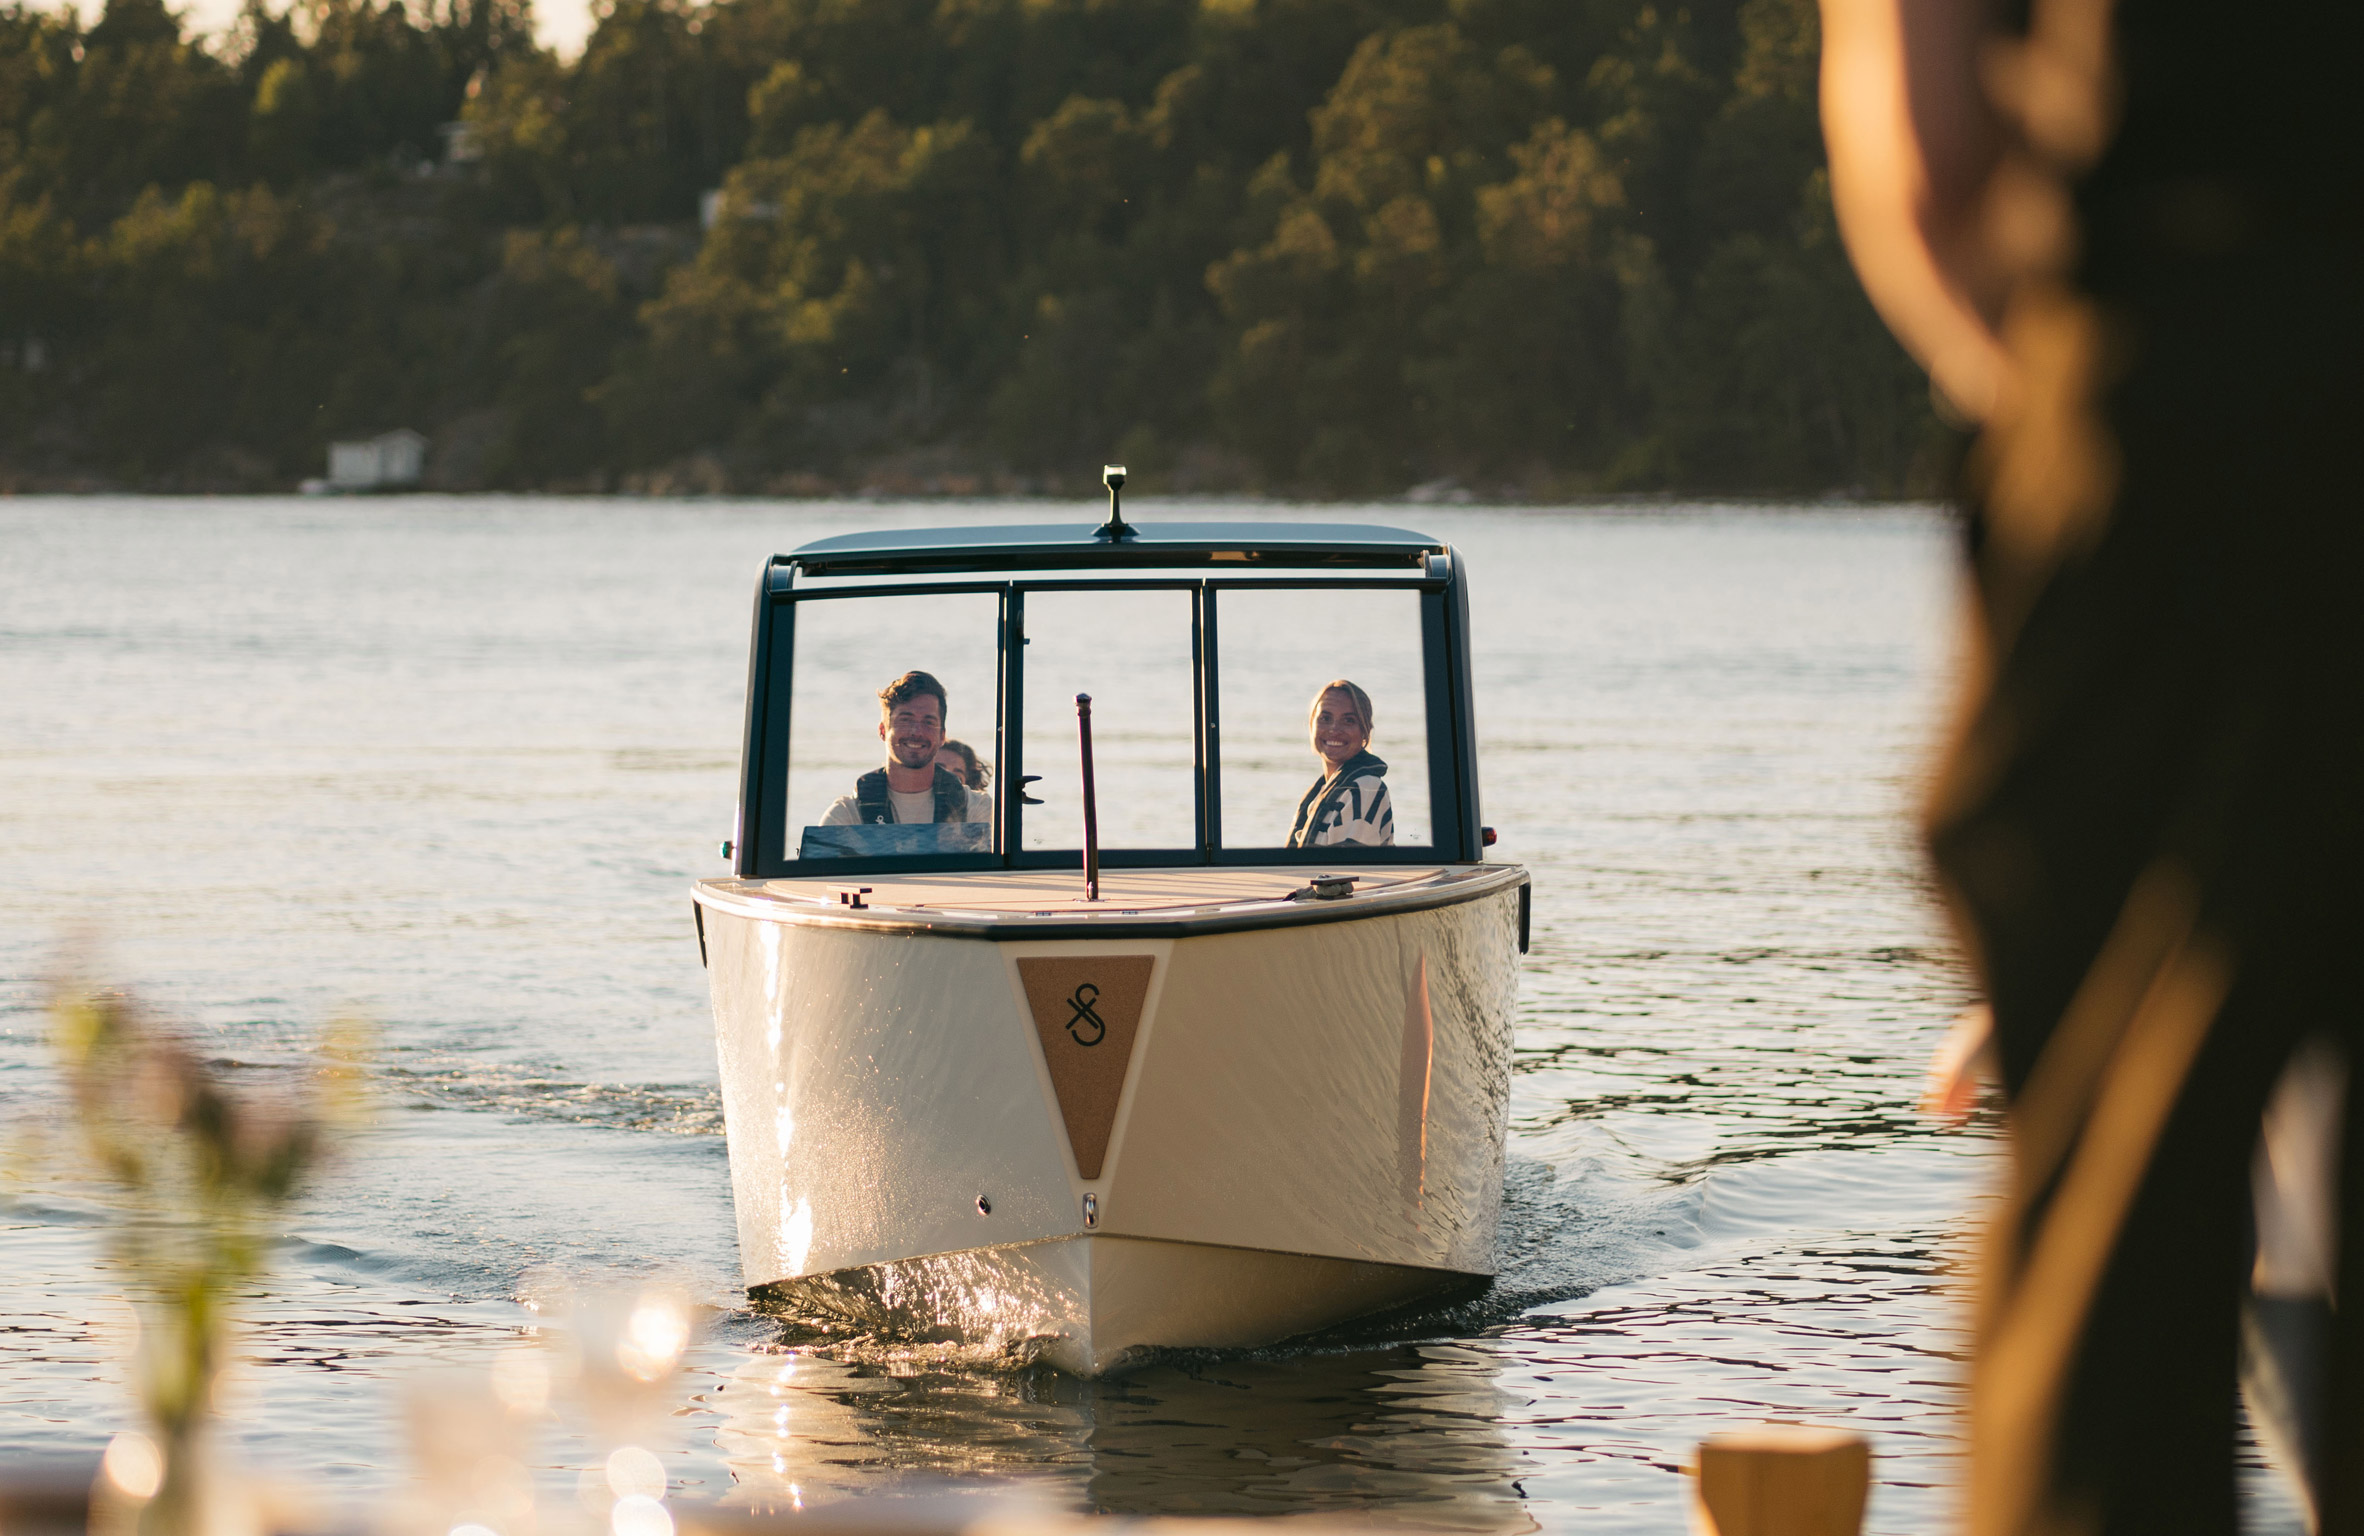 X Shore 1 is a more affordable electric boat that rivals fossil